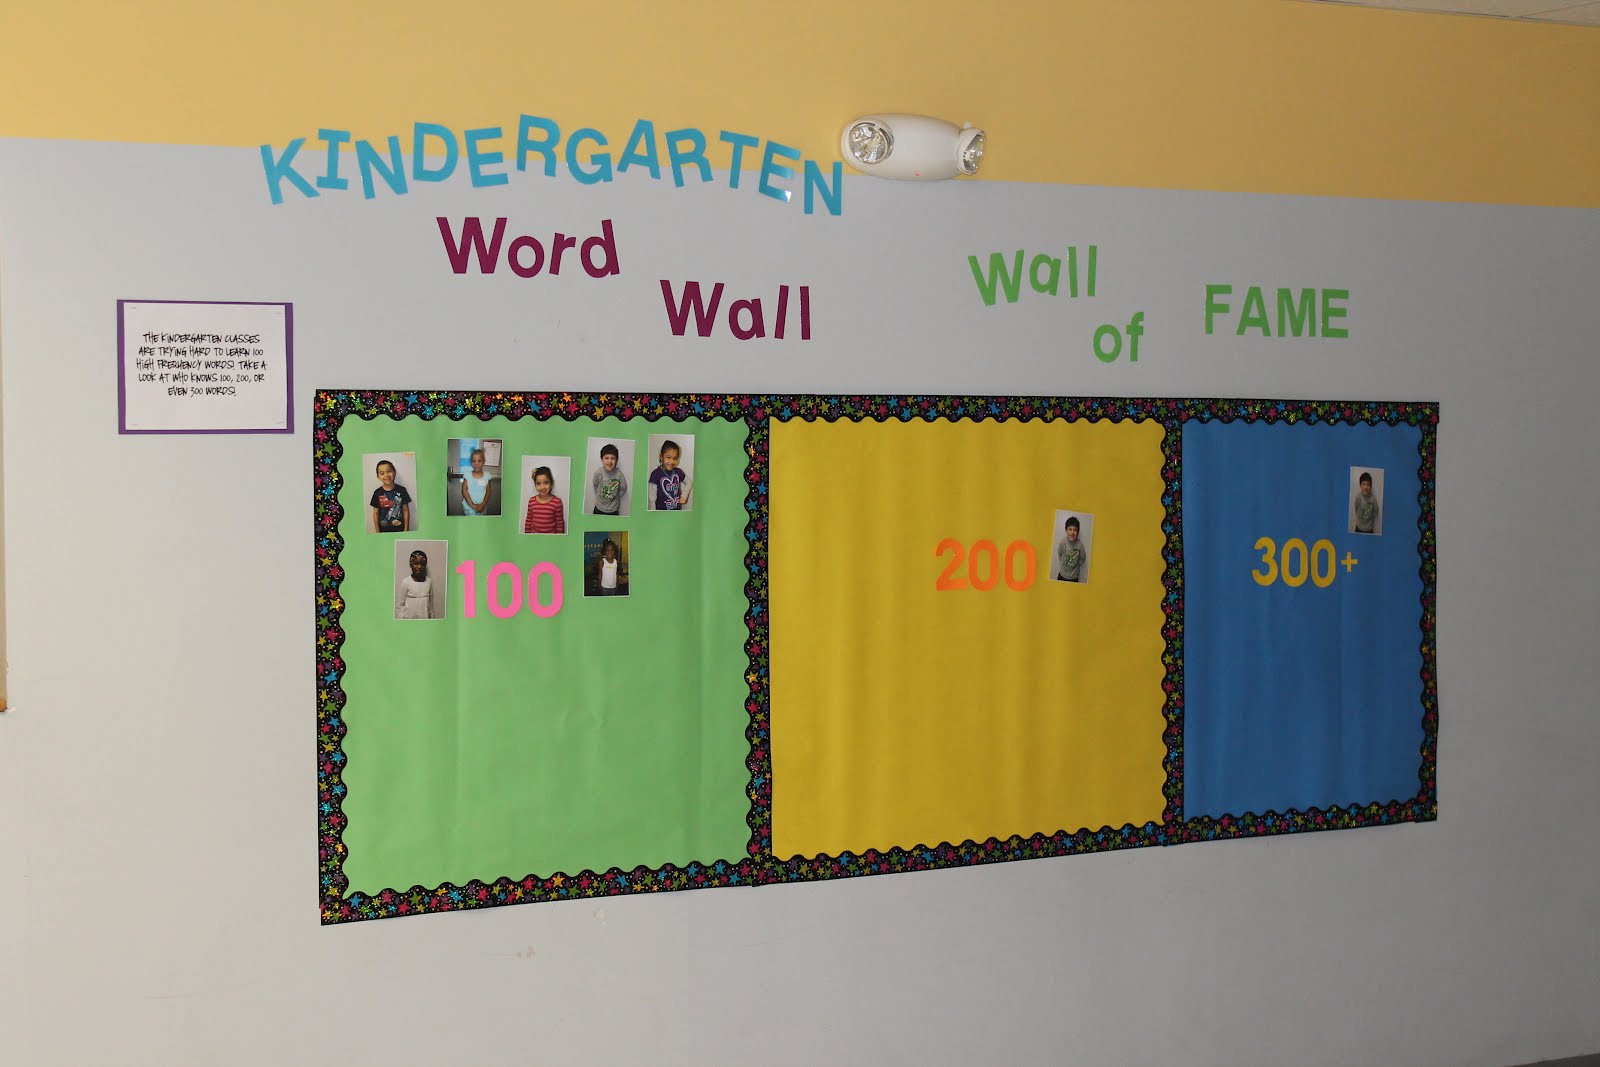 Wordwall немецкий. Word Wall. Wall of Fame. Wordwall 7. Wall of Fame in English class.